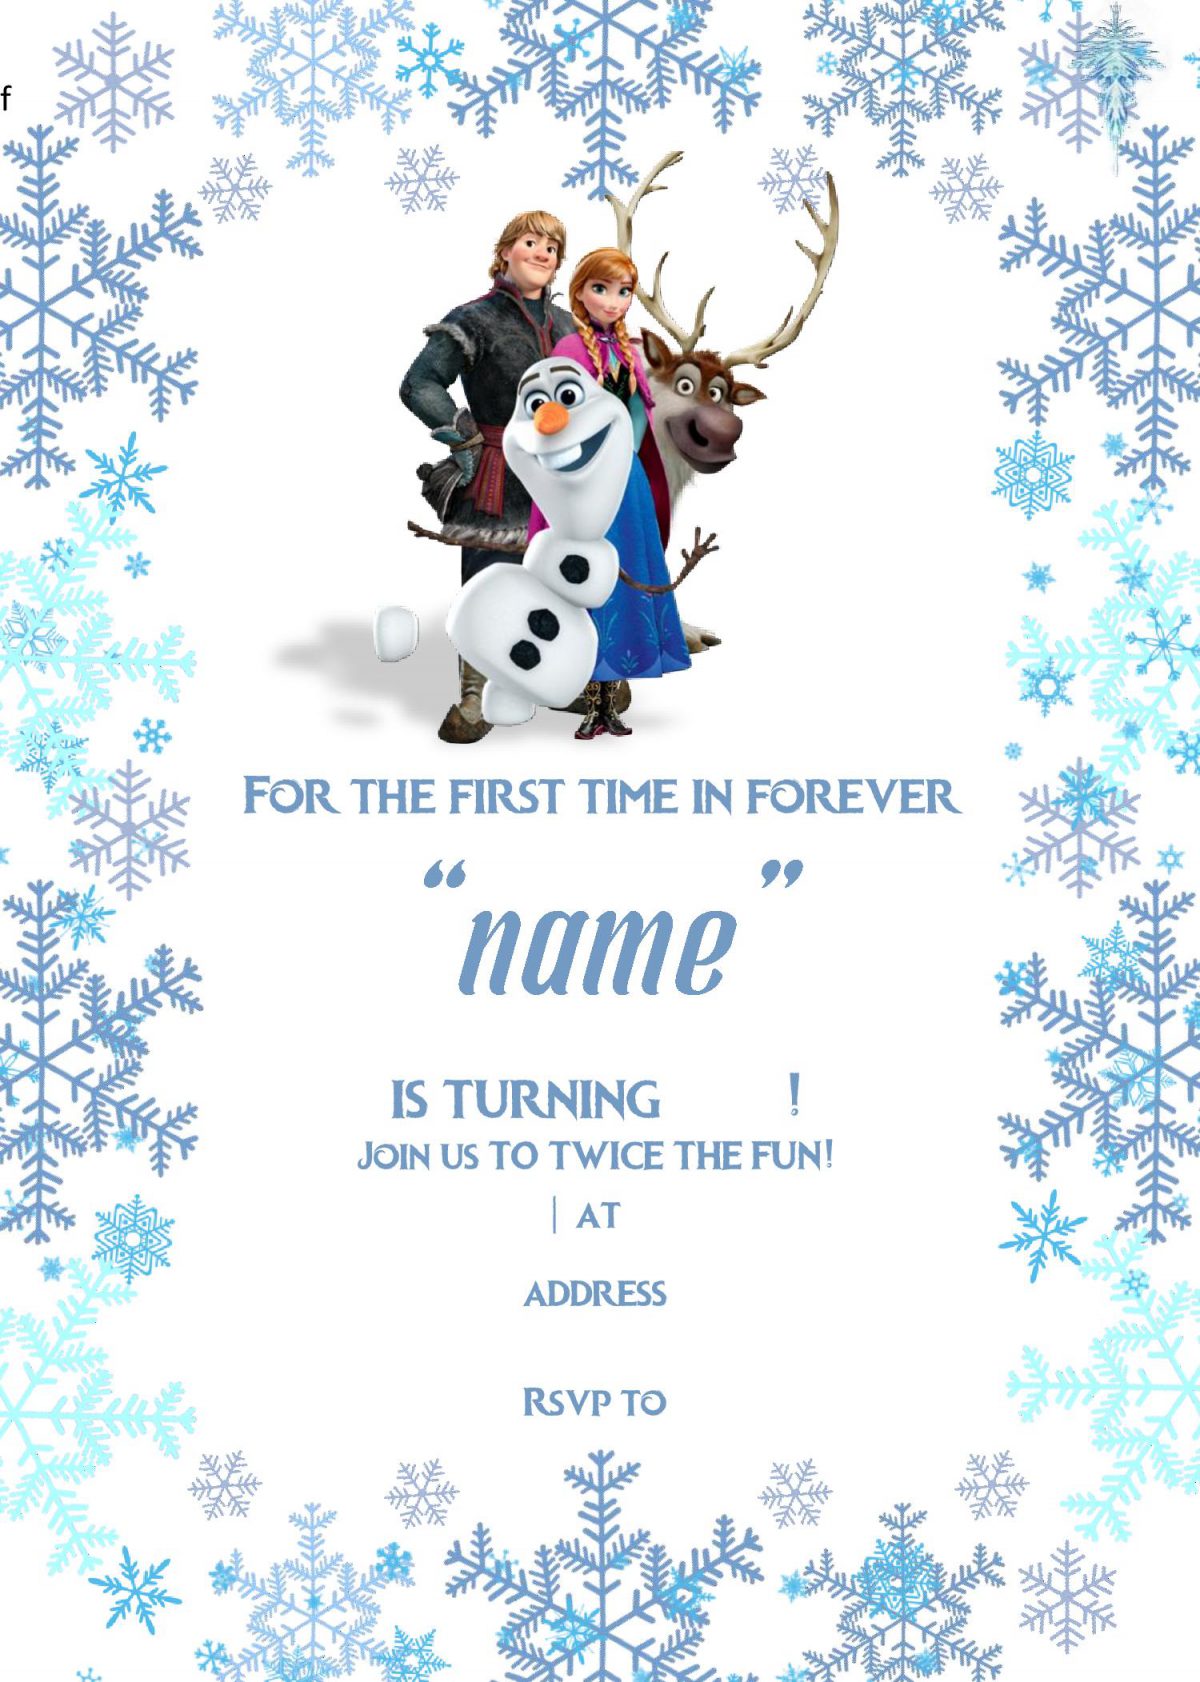 Frozen Invitation Templates - Editable With MS Word and has olaf and kristoff